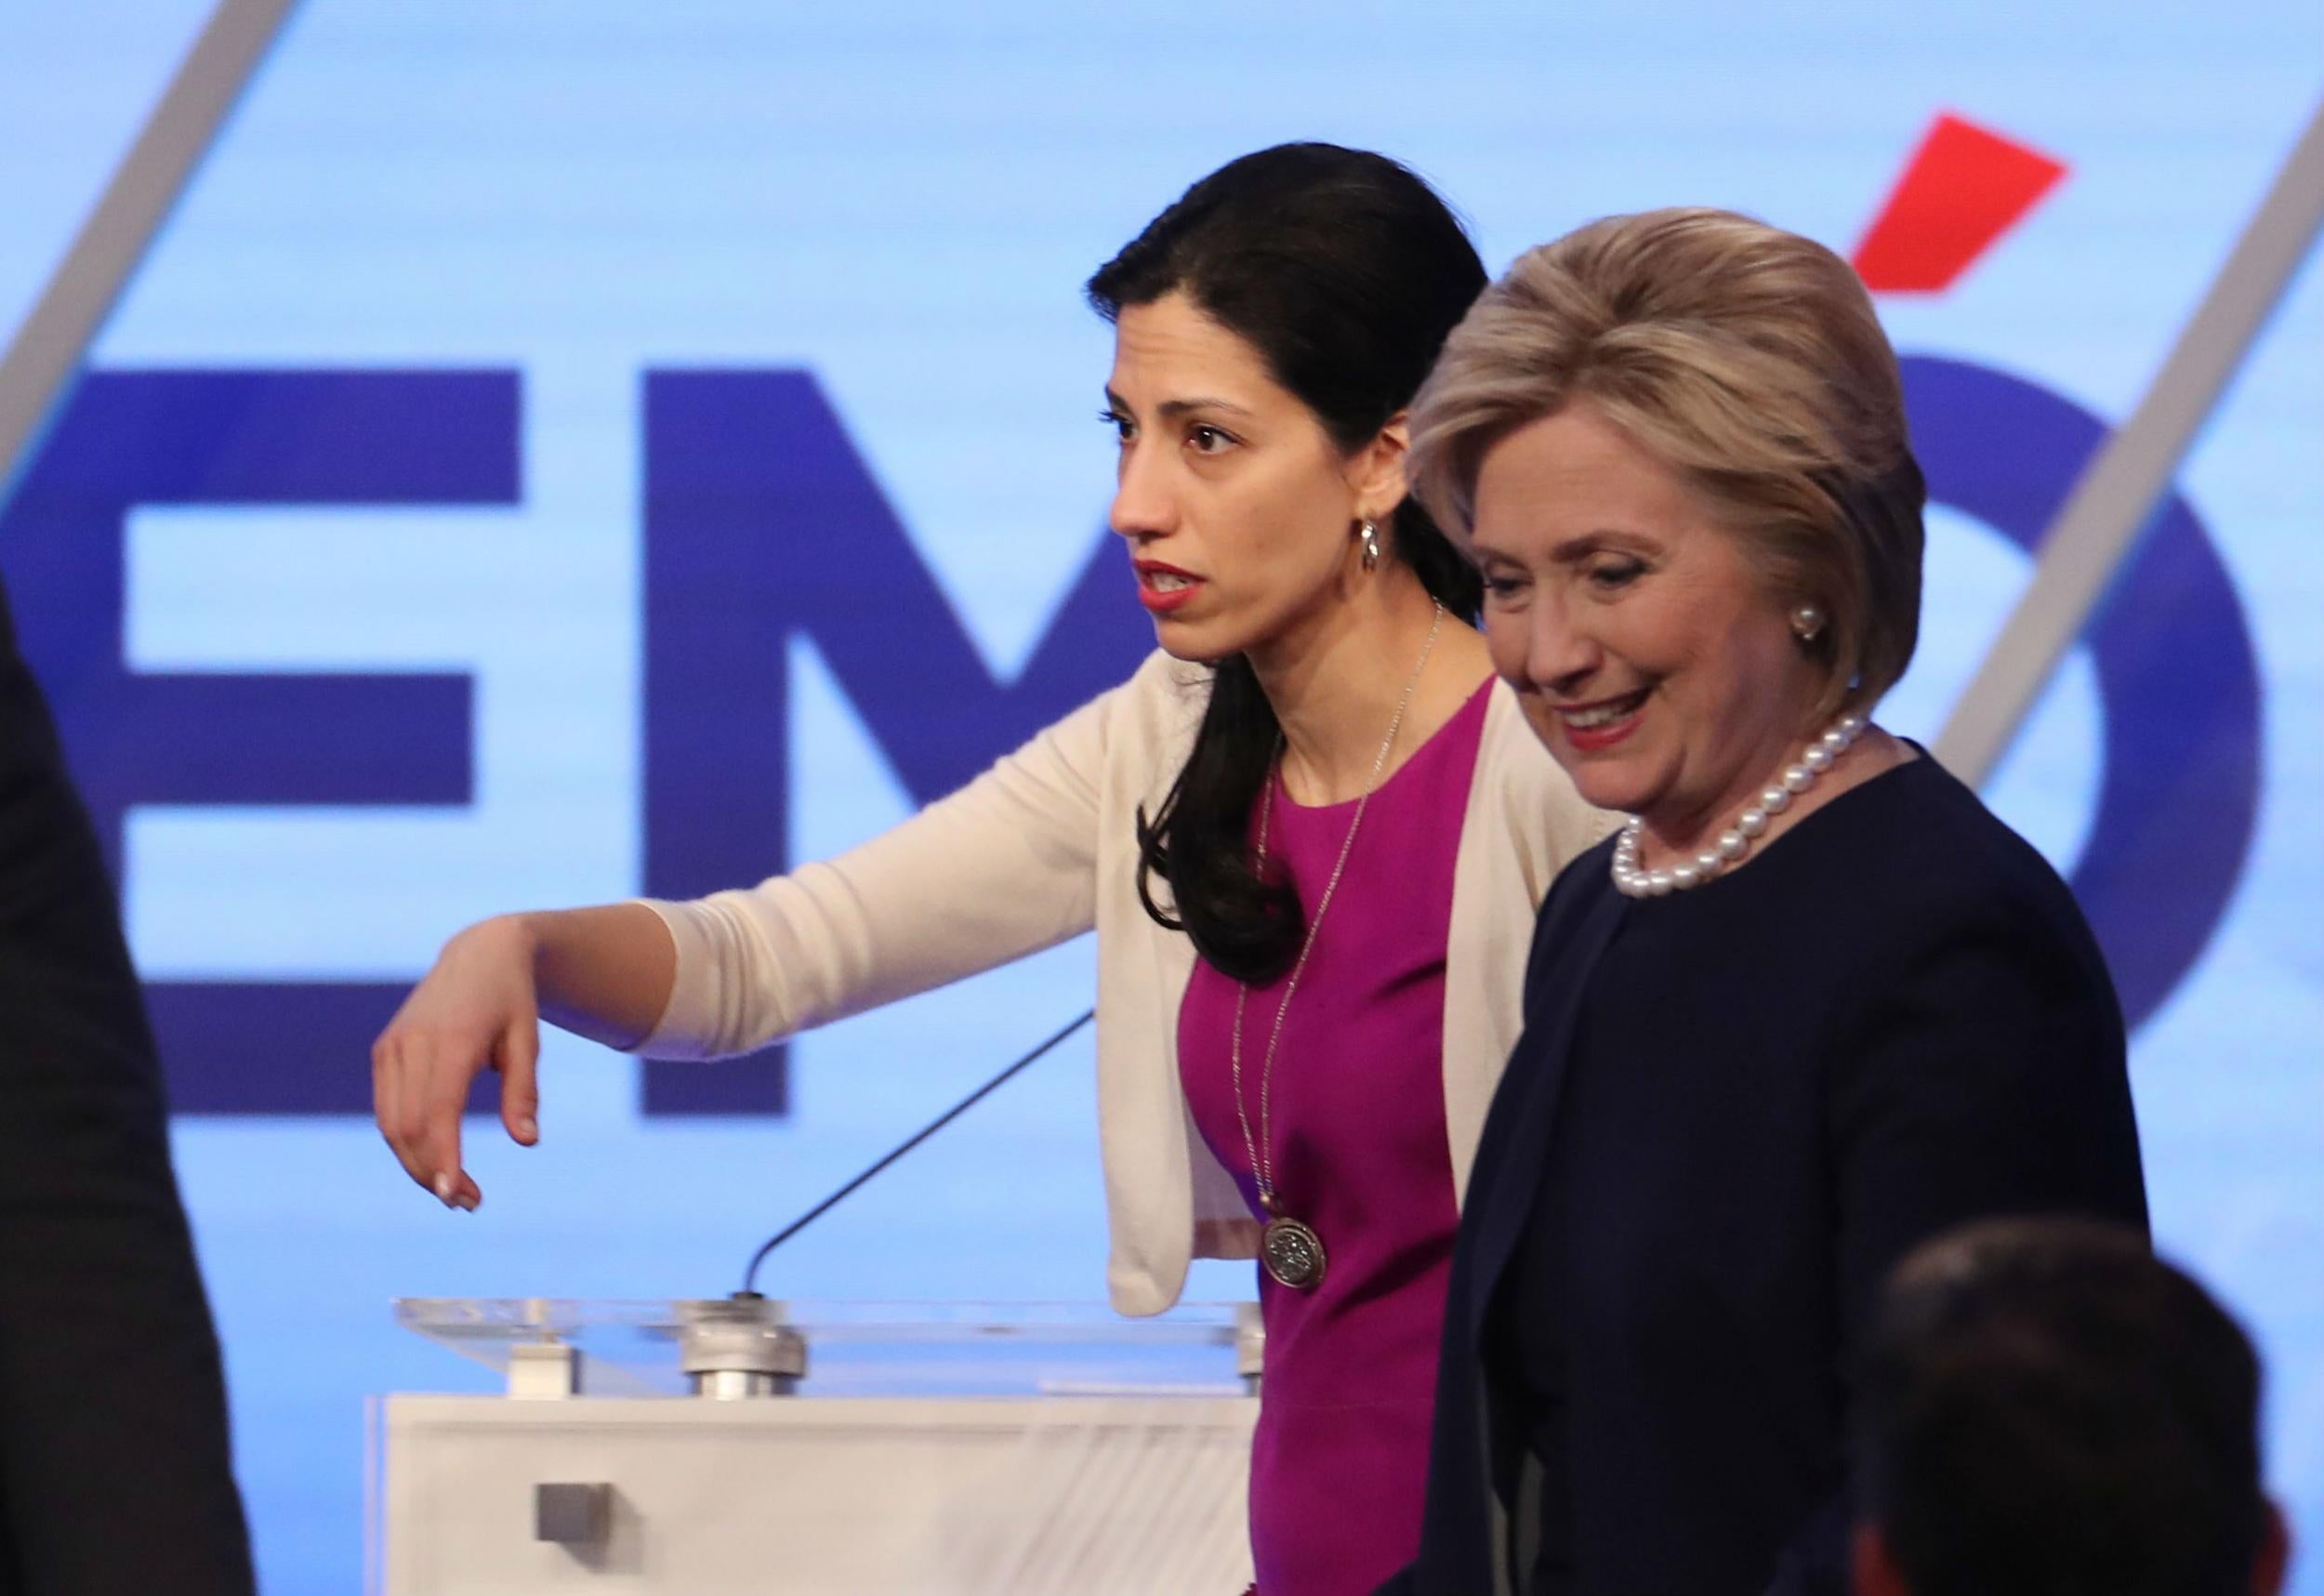 Ms Abedin has been close to Ms Clinton for a number of years